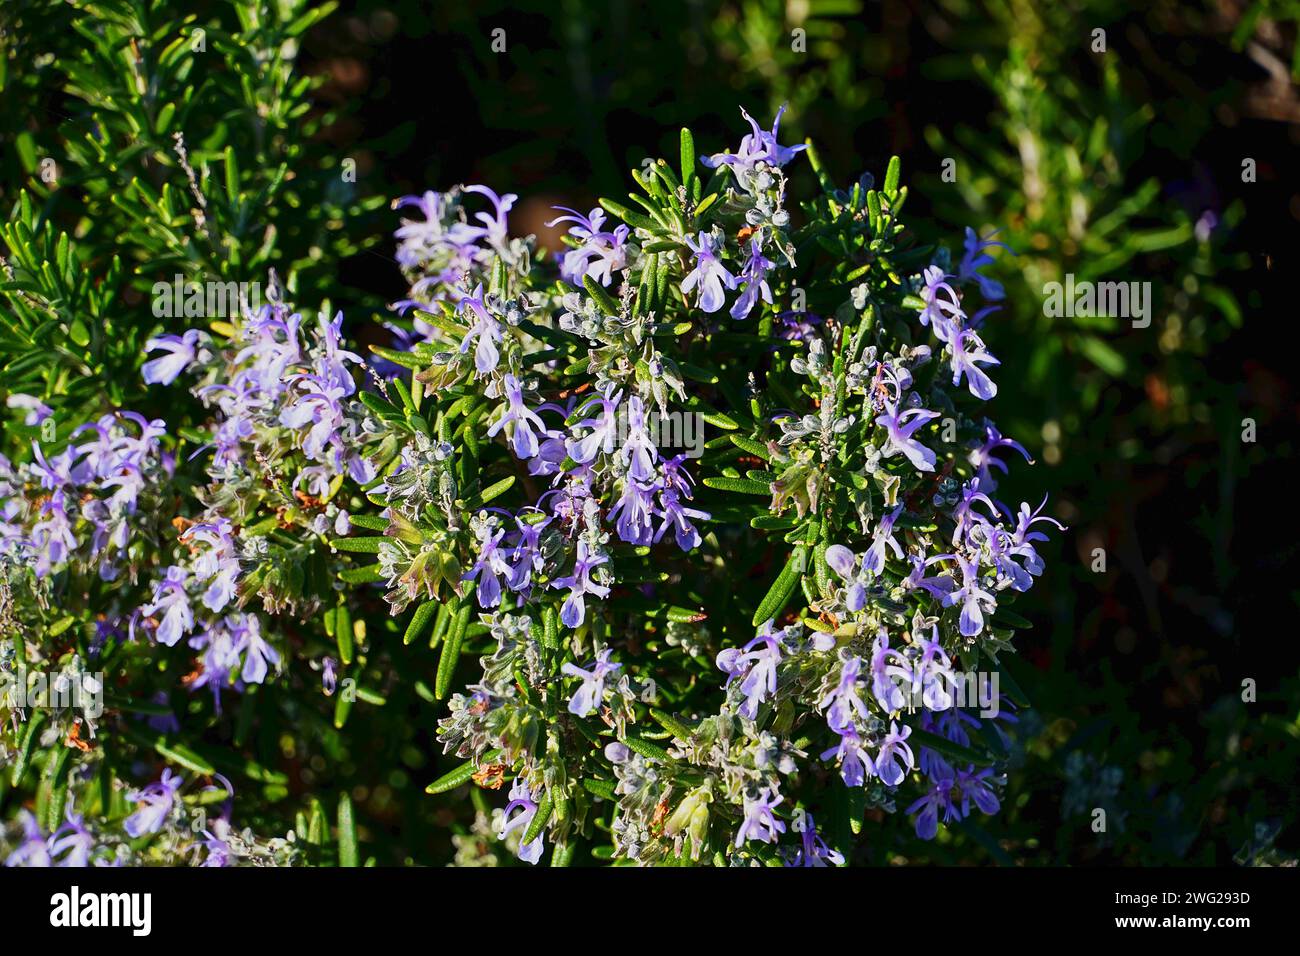 Rosemary plant or Rosmarinus officinalis.A wild herb with fragrant leaves and blue flowers, found in the Mediterranean. Here near Varkiza, Attica, Gre Stock Photo